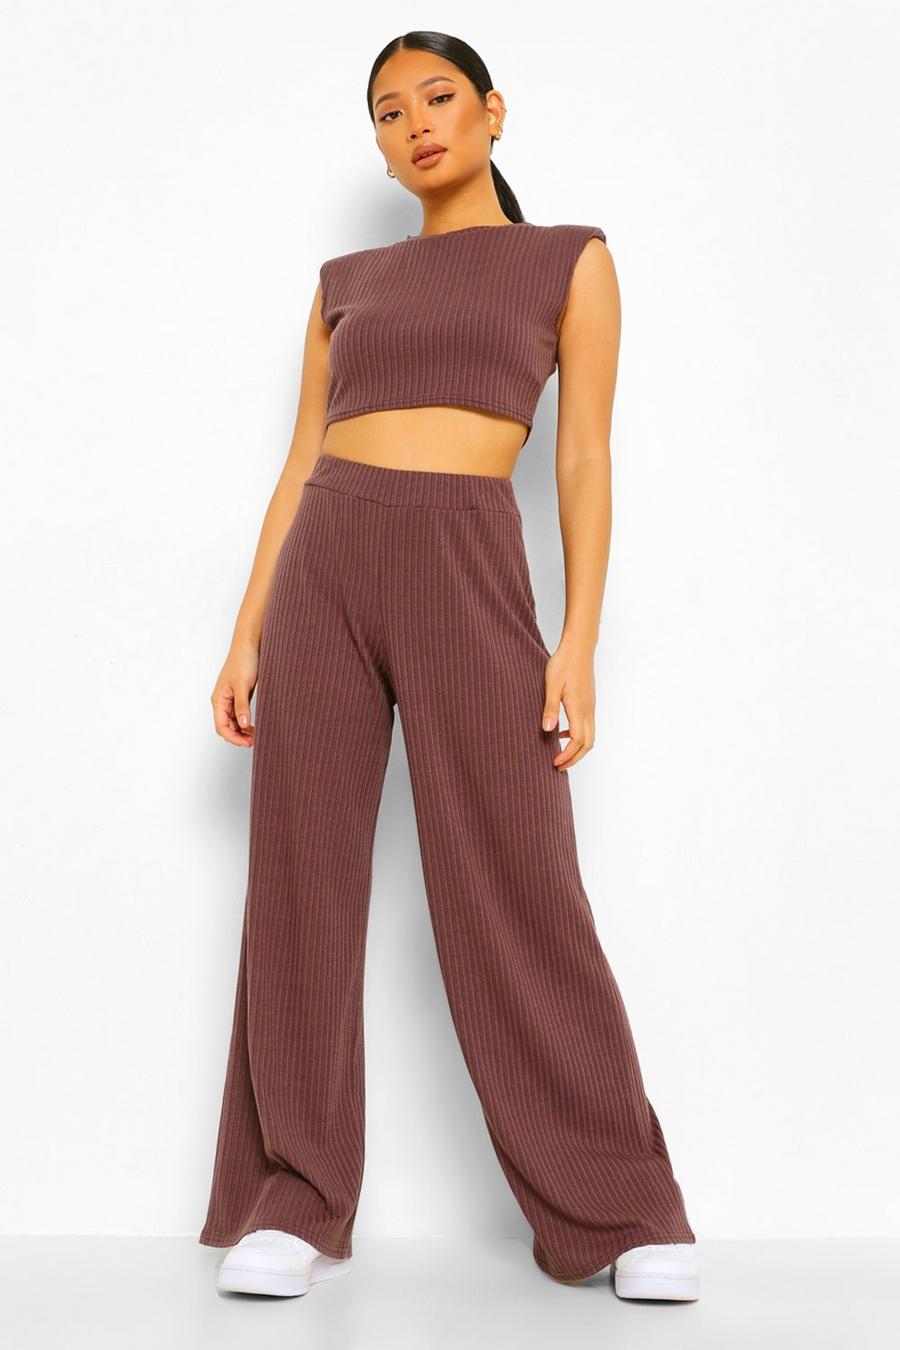 Chocolate Petite Shoulder Pad Crop And Wide Leg Jogger image number 1